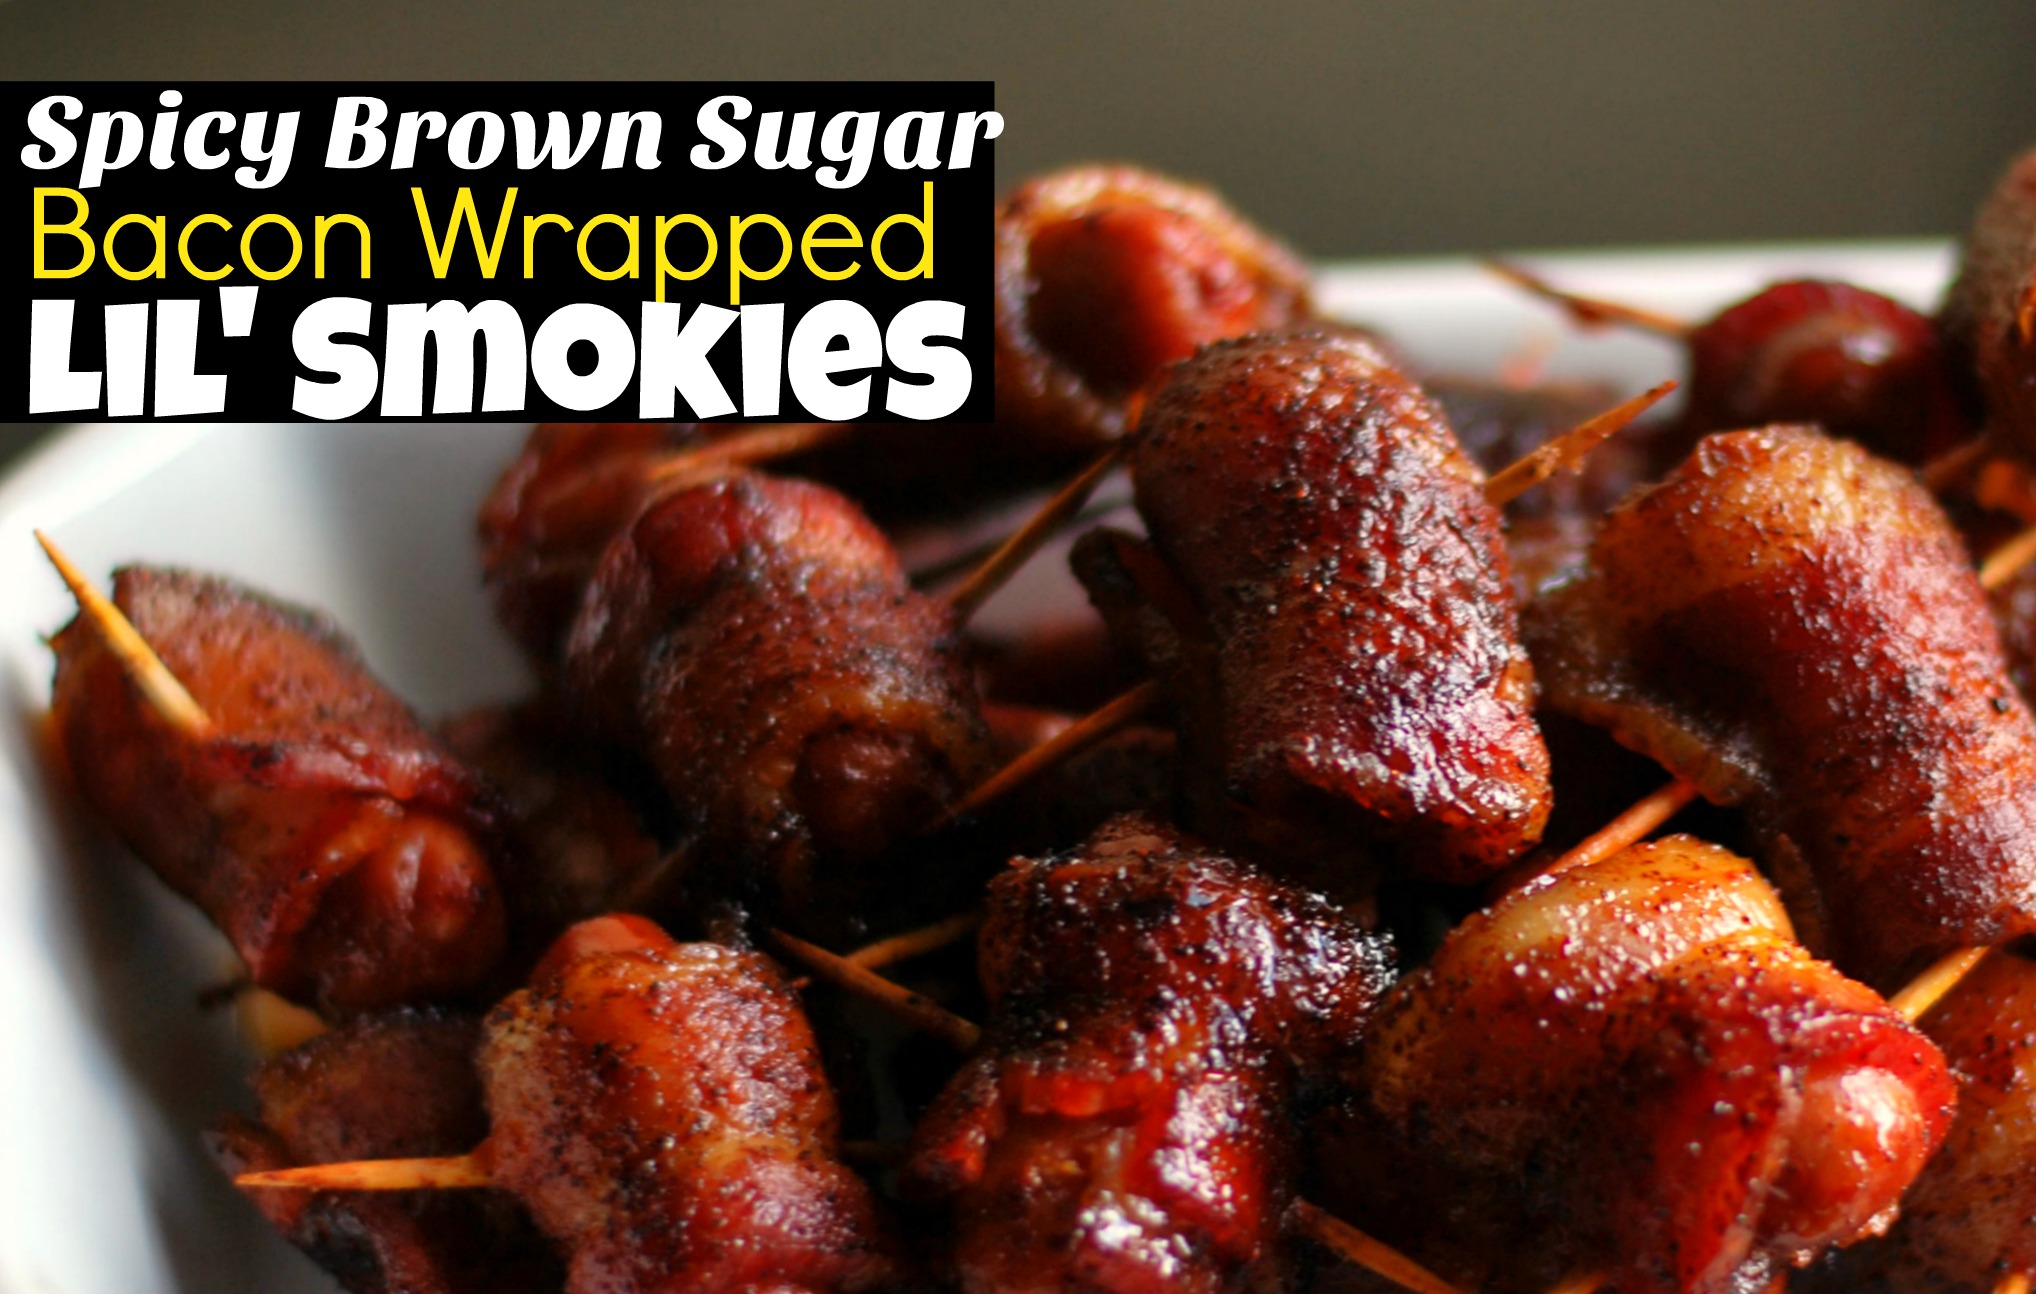 Spicy Brown Sugar Bacon Wrapped Lil’ Smokies